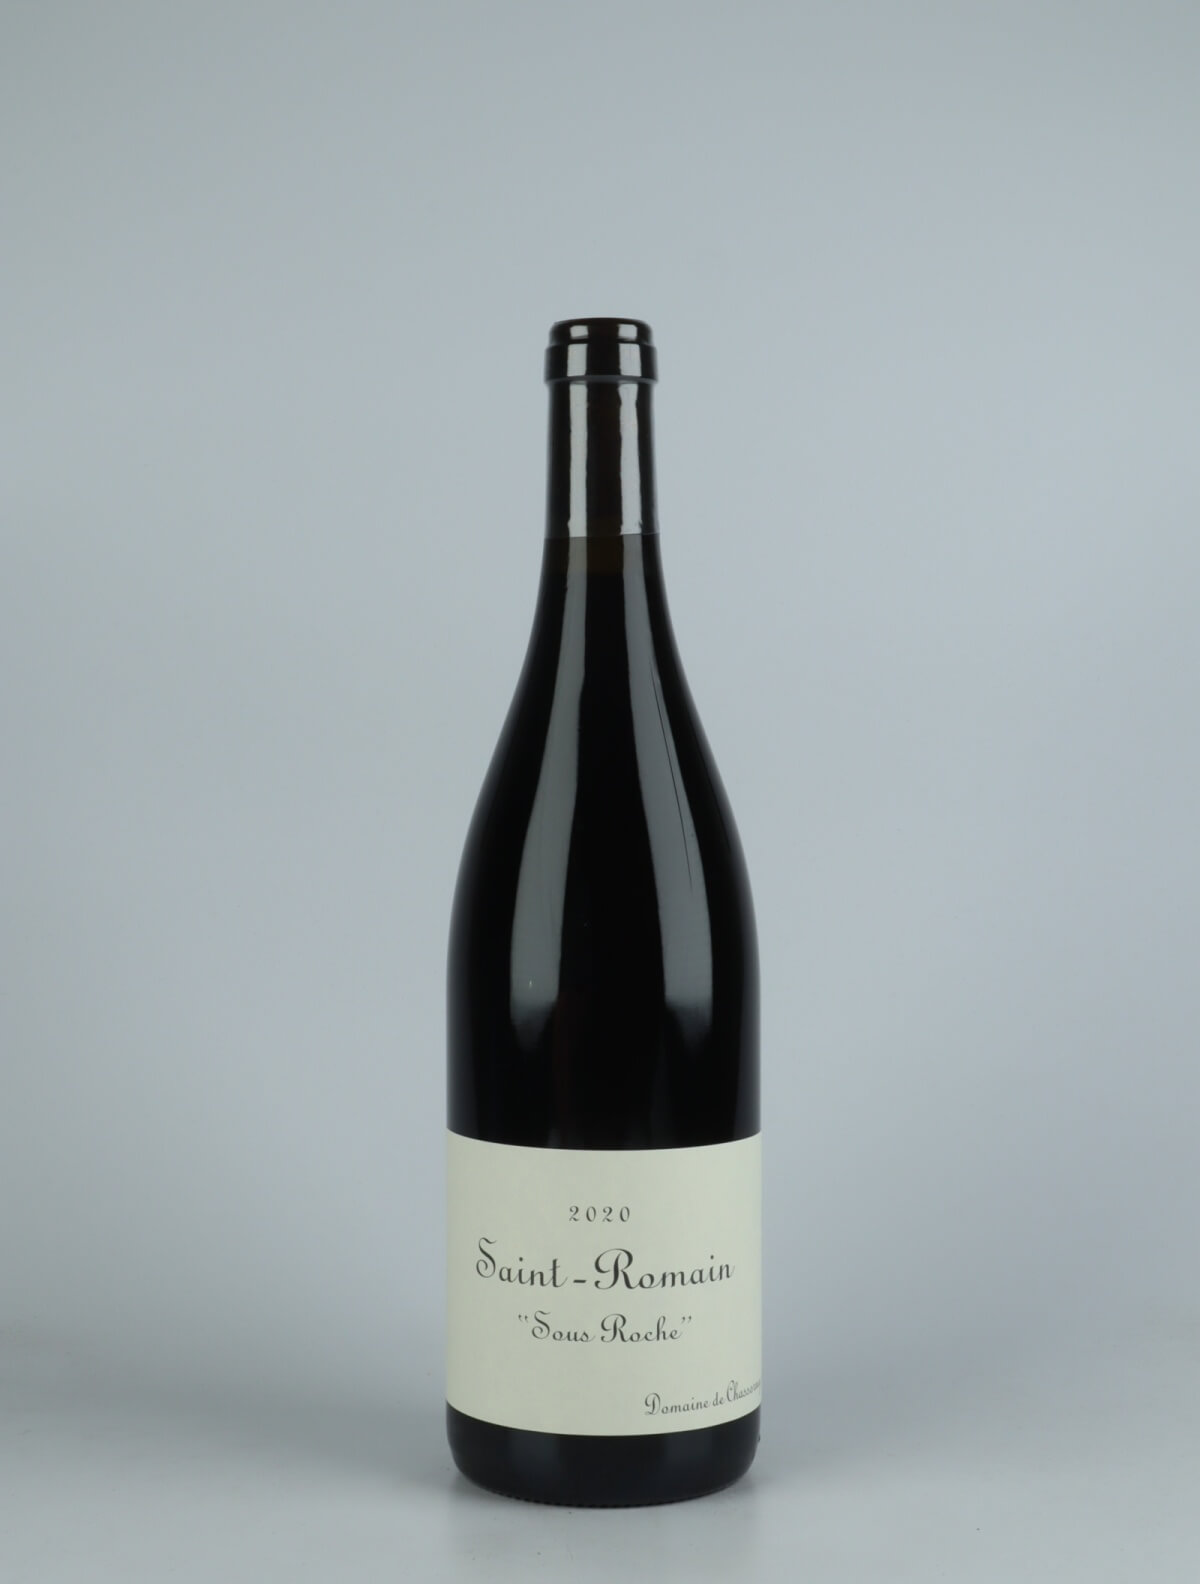 A bottle 2020 Saint Romain Rouge - Sous Roche Red wine from Domaine de Chassorney, Burgundy in France